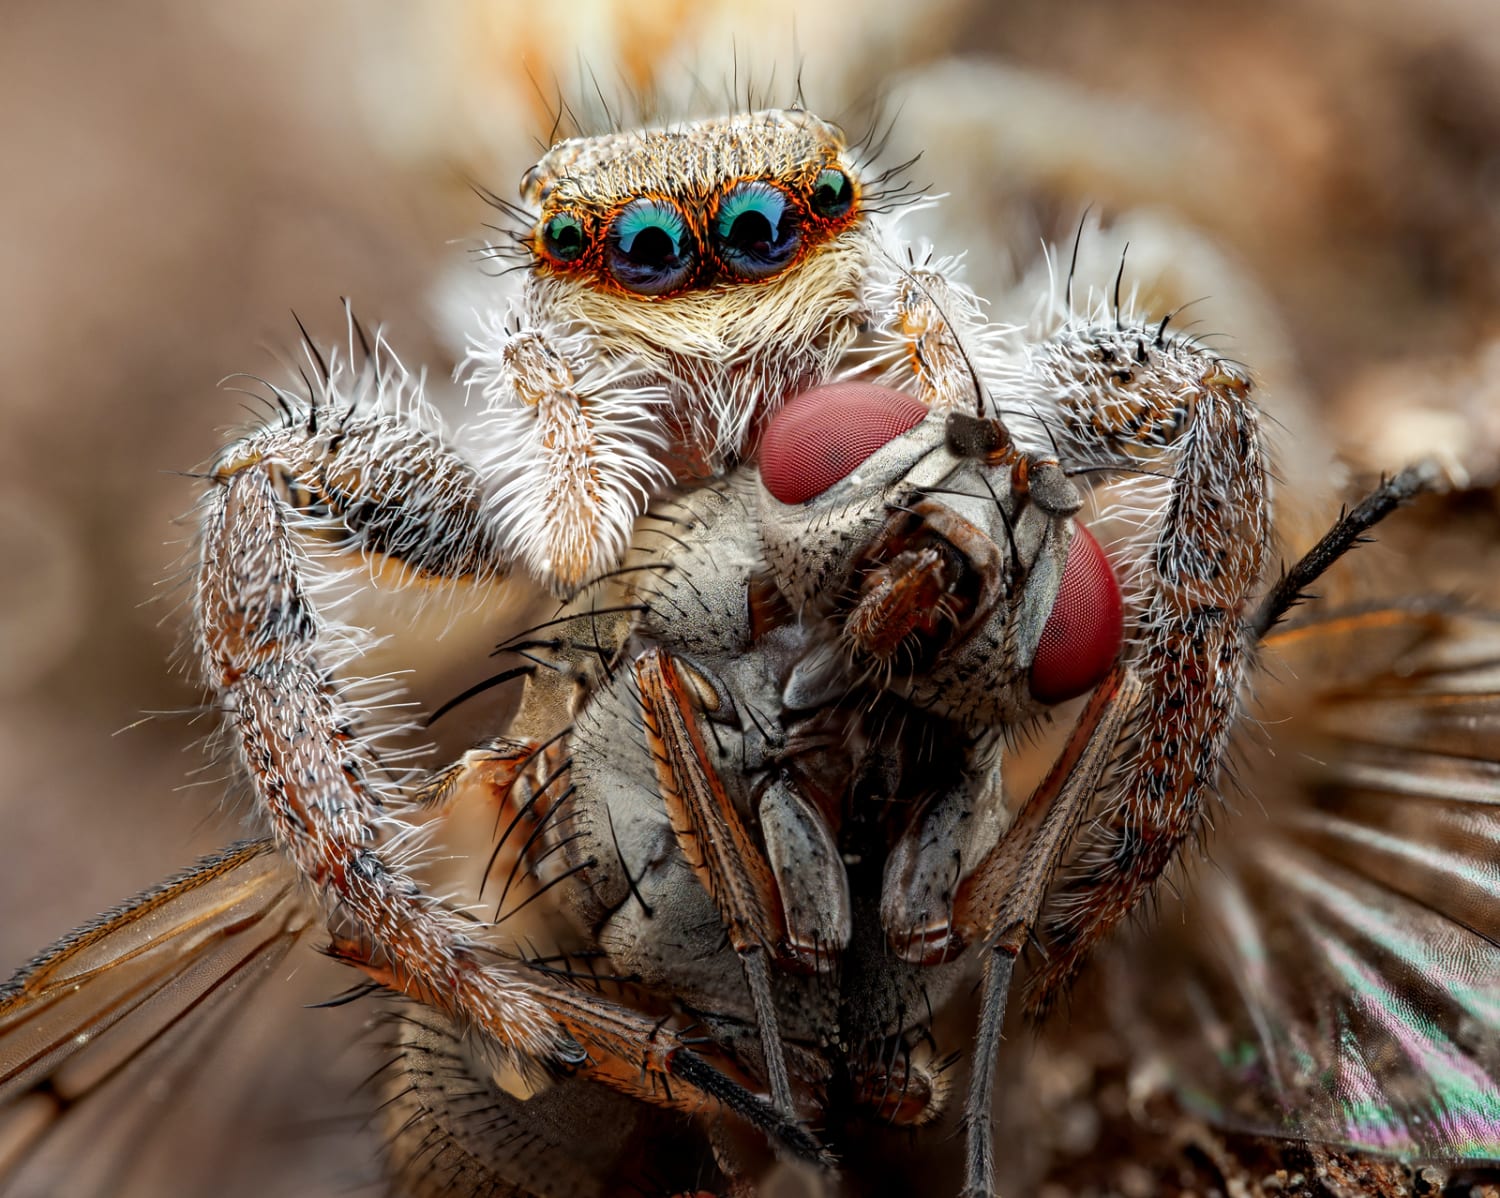 Jumping spider with a snack!